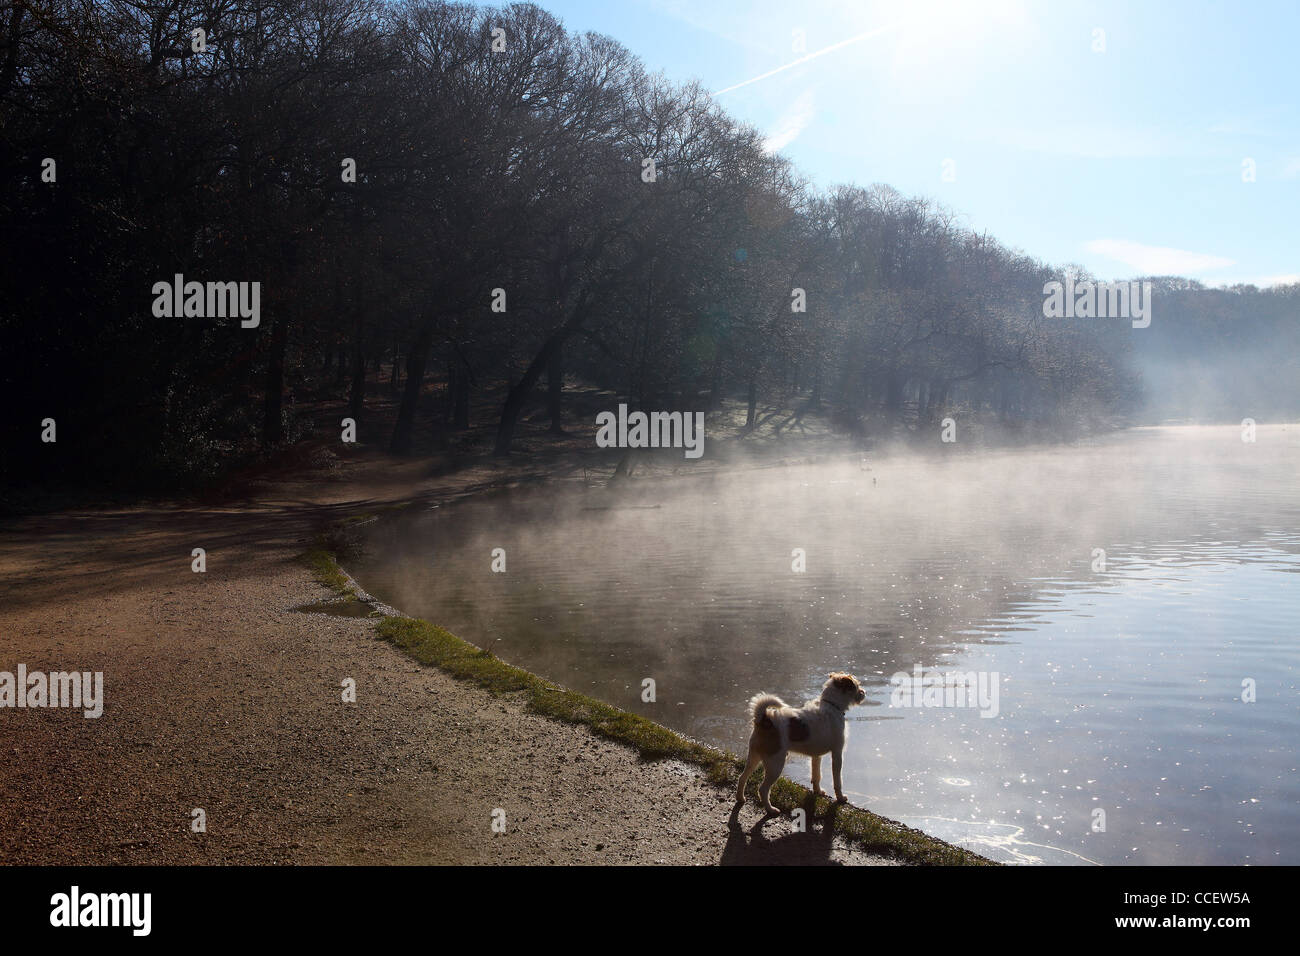 A dog standing next to a lake Stock Photo